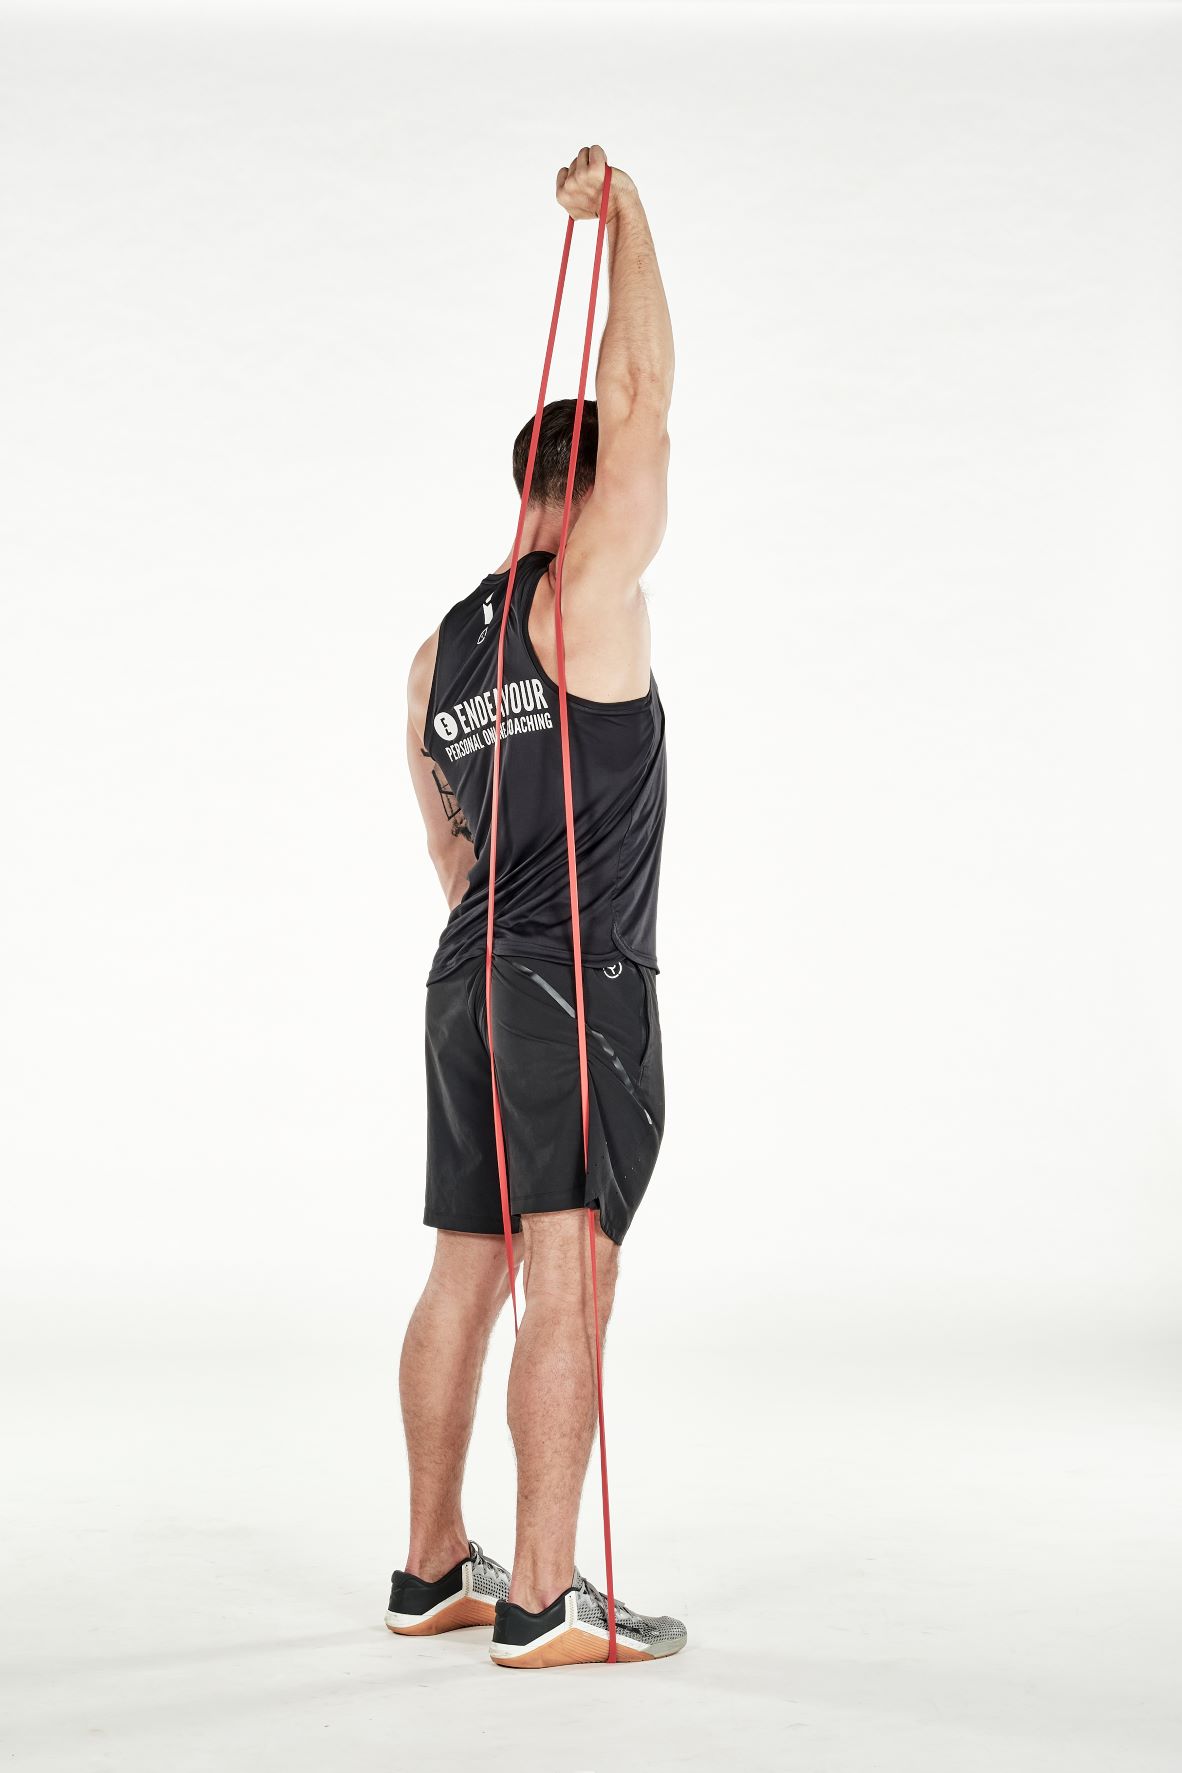 man demonstrating step two of single arm triceps extension; standing tall, his arm reaches behind his head to hold a band that's held under one foot; his arm straightens as he pulls the band and reaches up; he wears a black fitness vest, black shorts and trainers